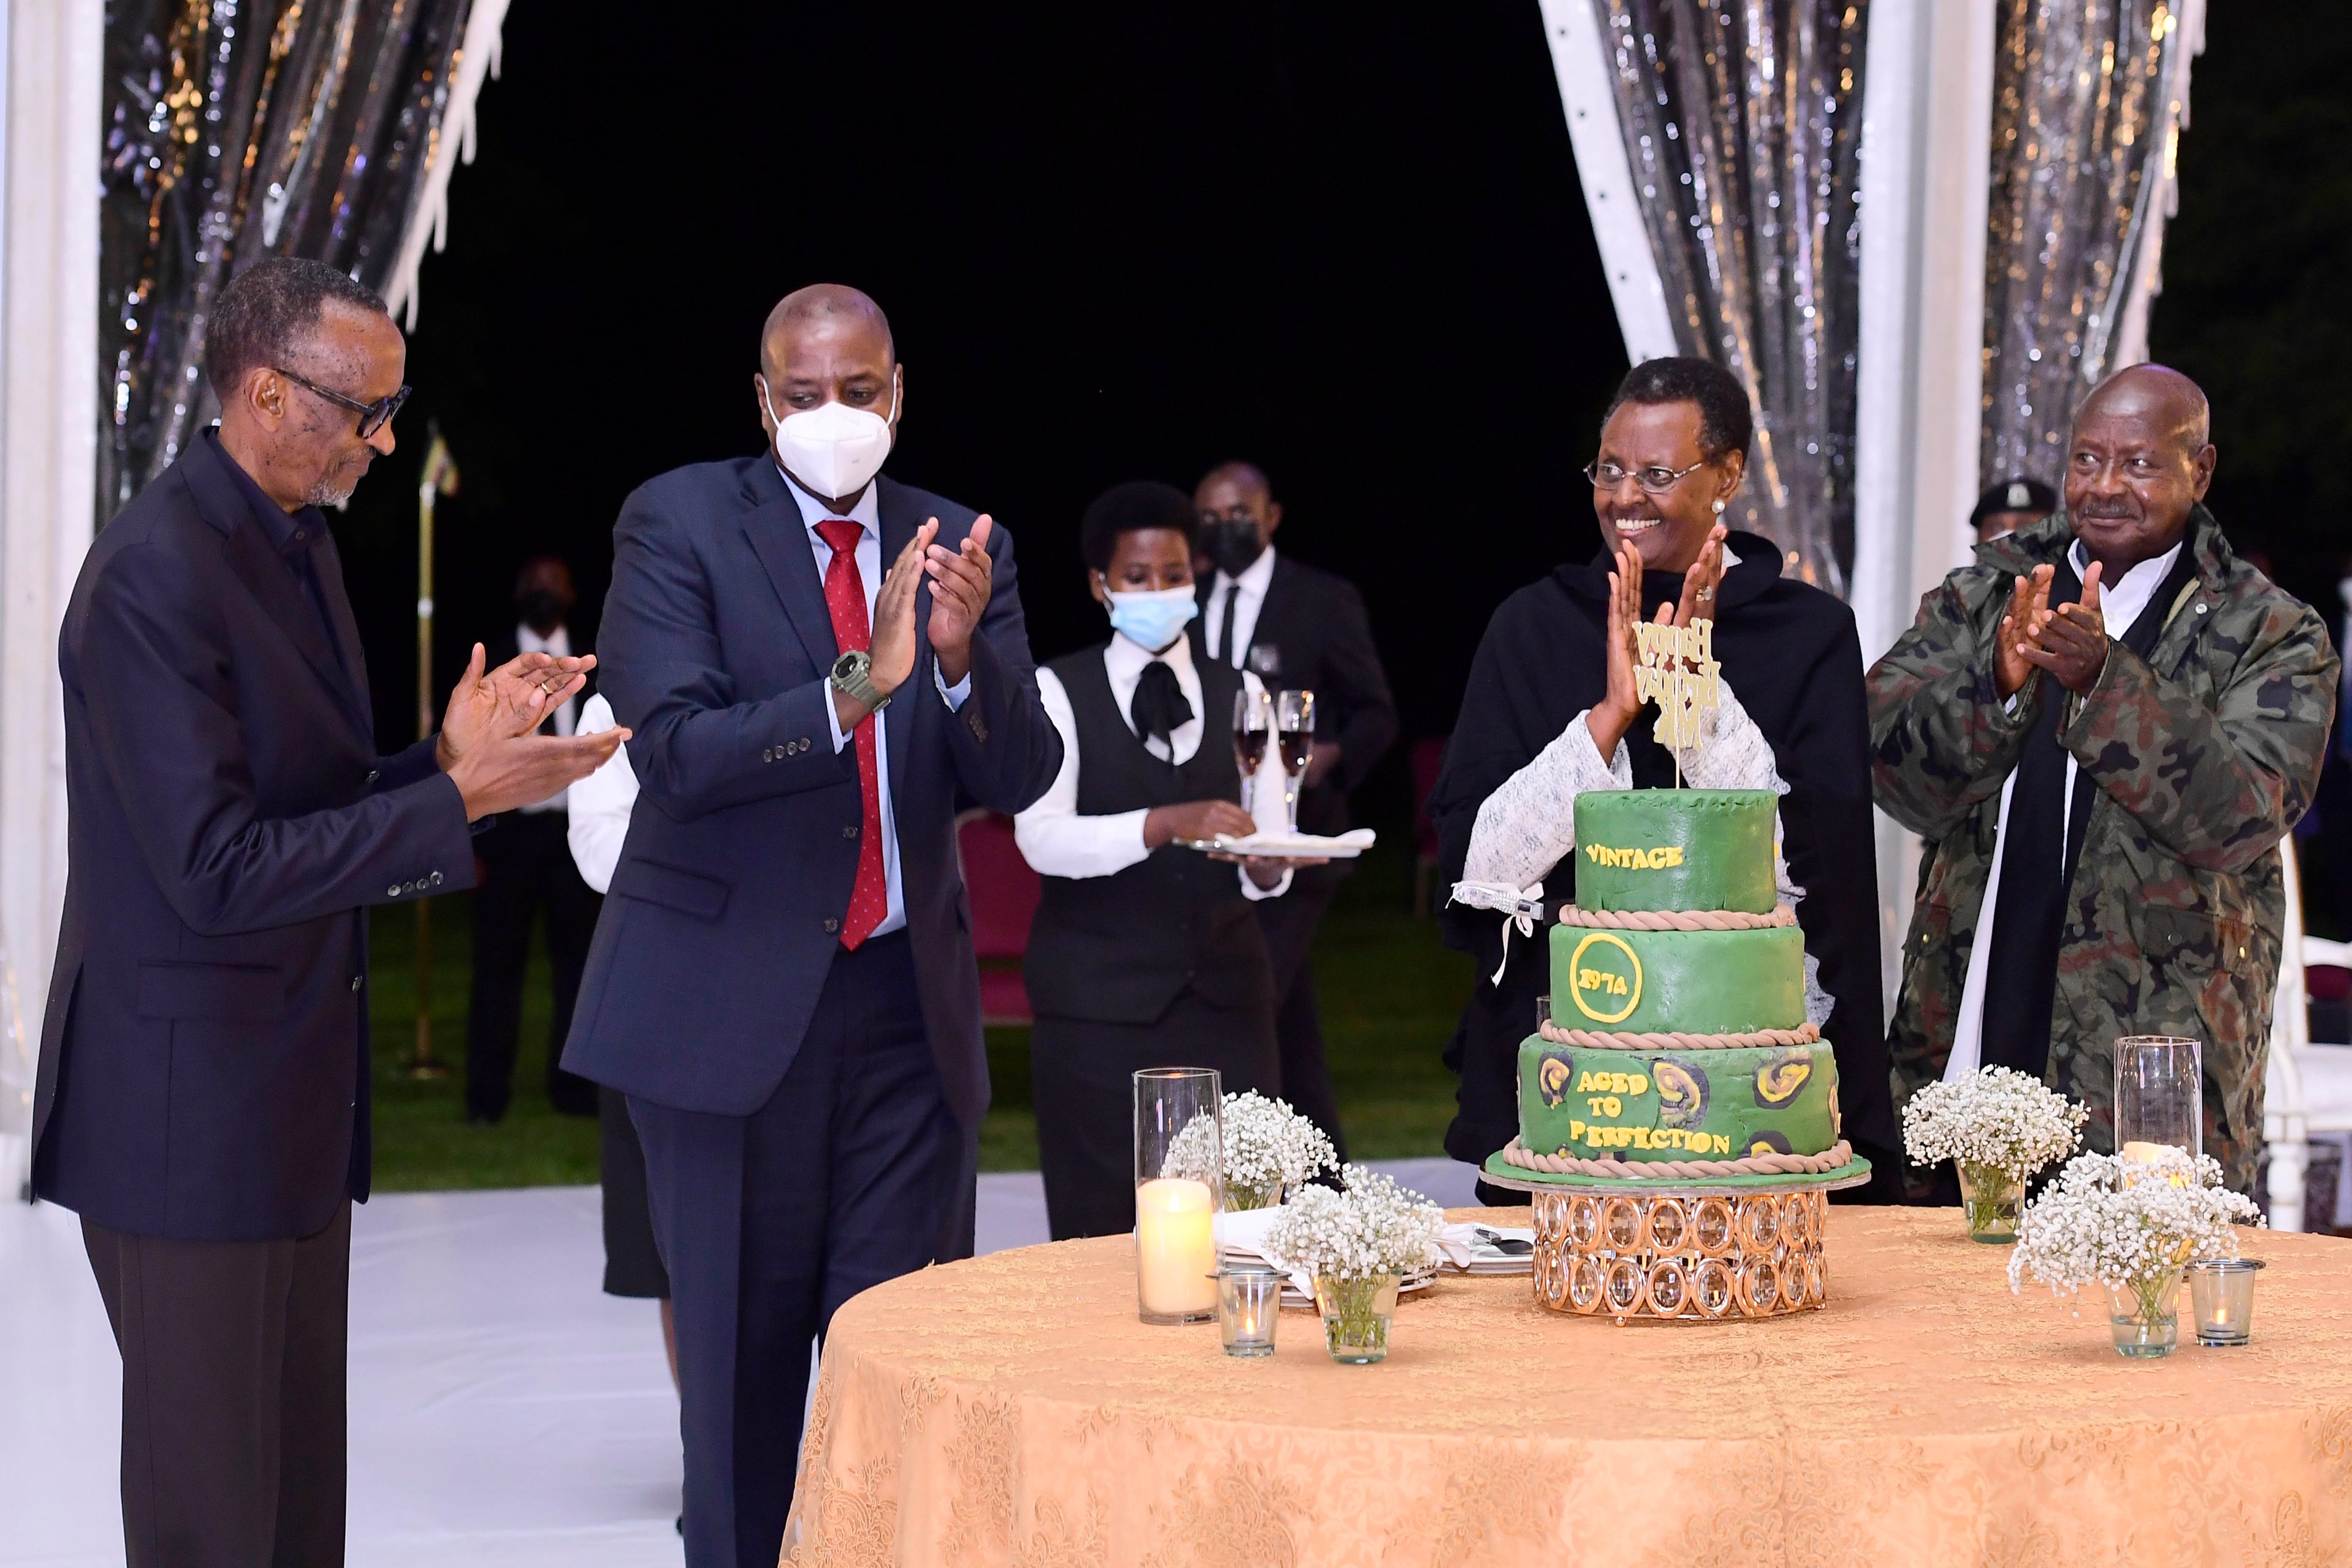 President Kagame, Lt Gen Muhoozi Kainerugaba, First Lady Janet Museveni and President Museveni applaud at Muhooziu2019s 48th birthday dinner at State House Entebbe on Sunday, April 24. 